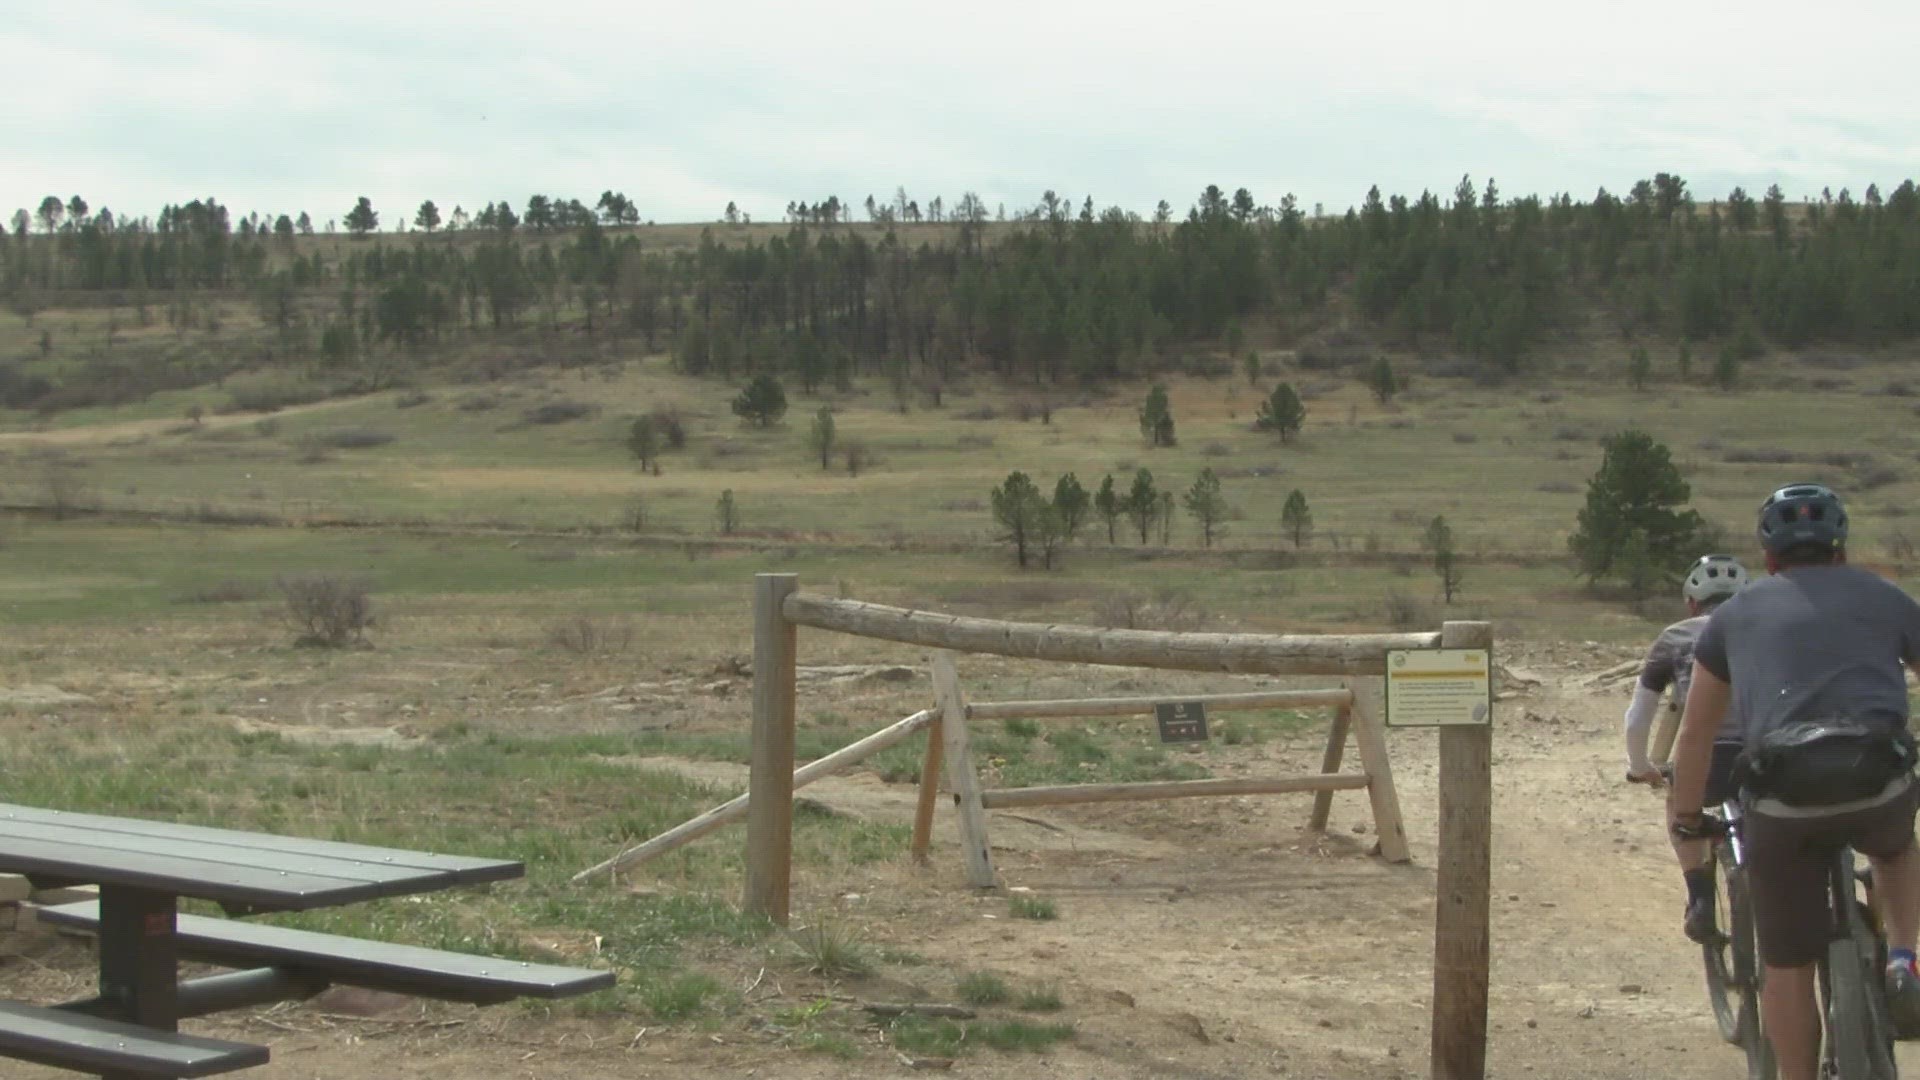 For more than 100 years a coal fire has been burning underground in Boulder County. Officials were looking into it as a potential cause of the Marshall fire.